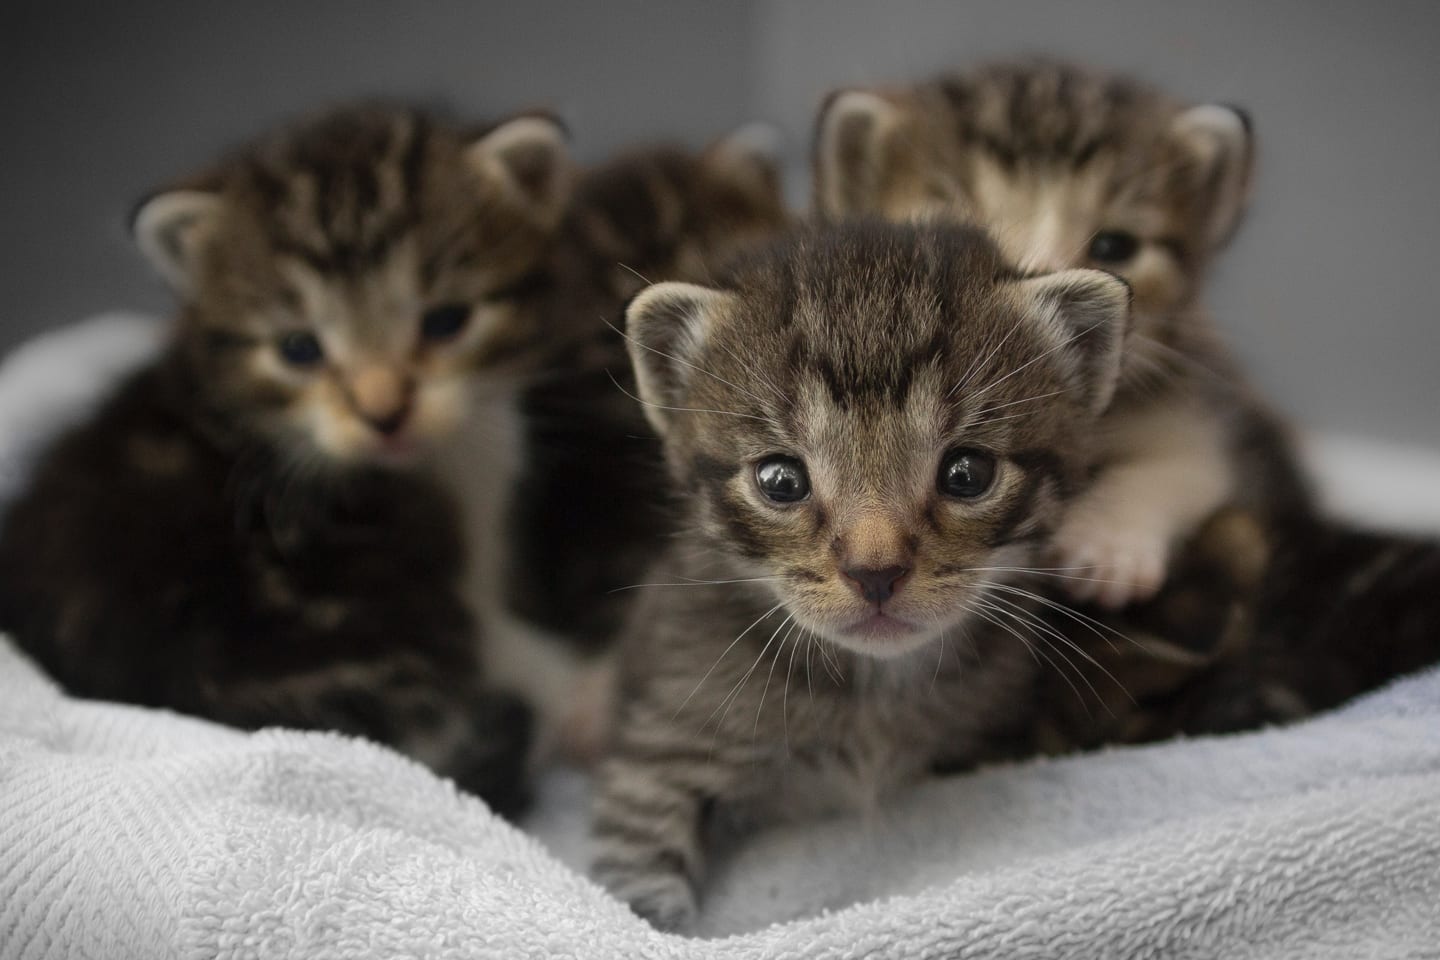 puppy and kitten season is here – but what does that have to do